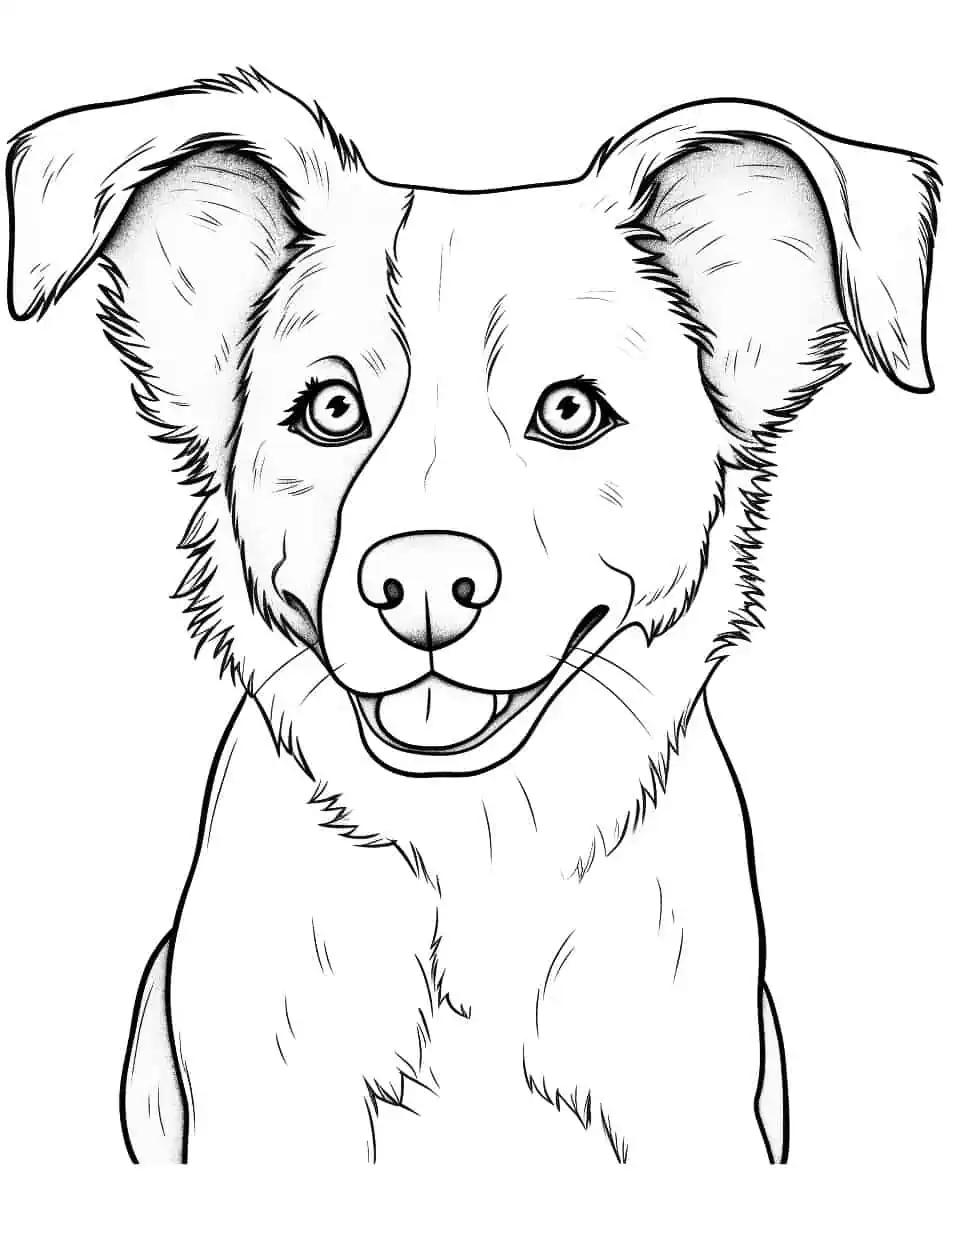 Full Page Border Collie Dog Coloring - A full-page, realistic portrait of a Border Collie.